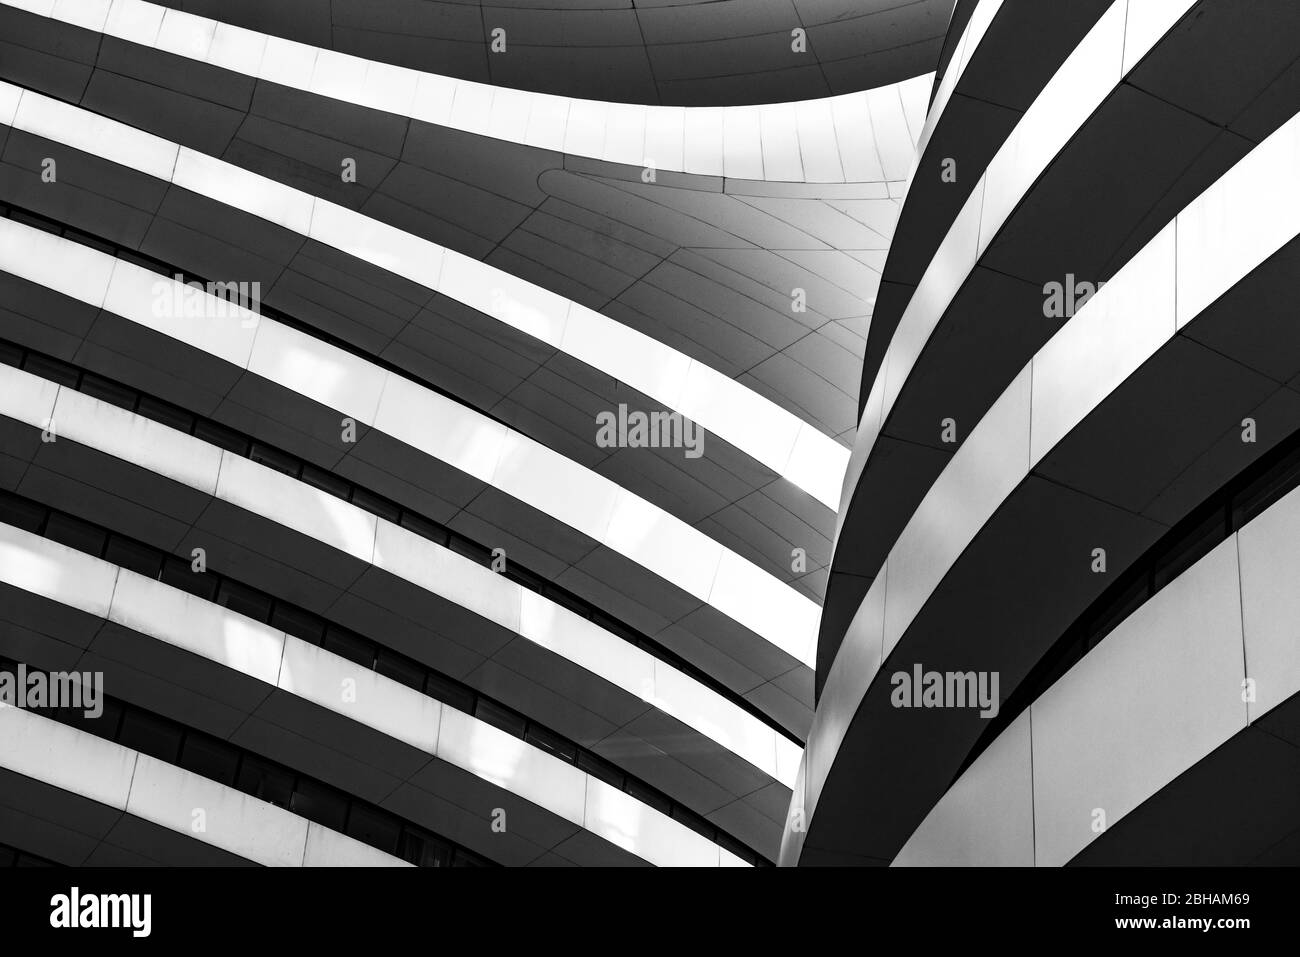 Asia, People's Republic of China, North China, Beijing, northern capital, Modern architecture in Wang Jing Stock Photo